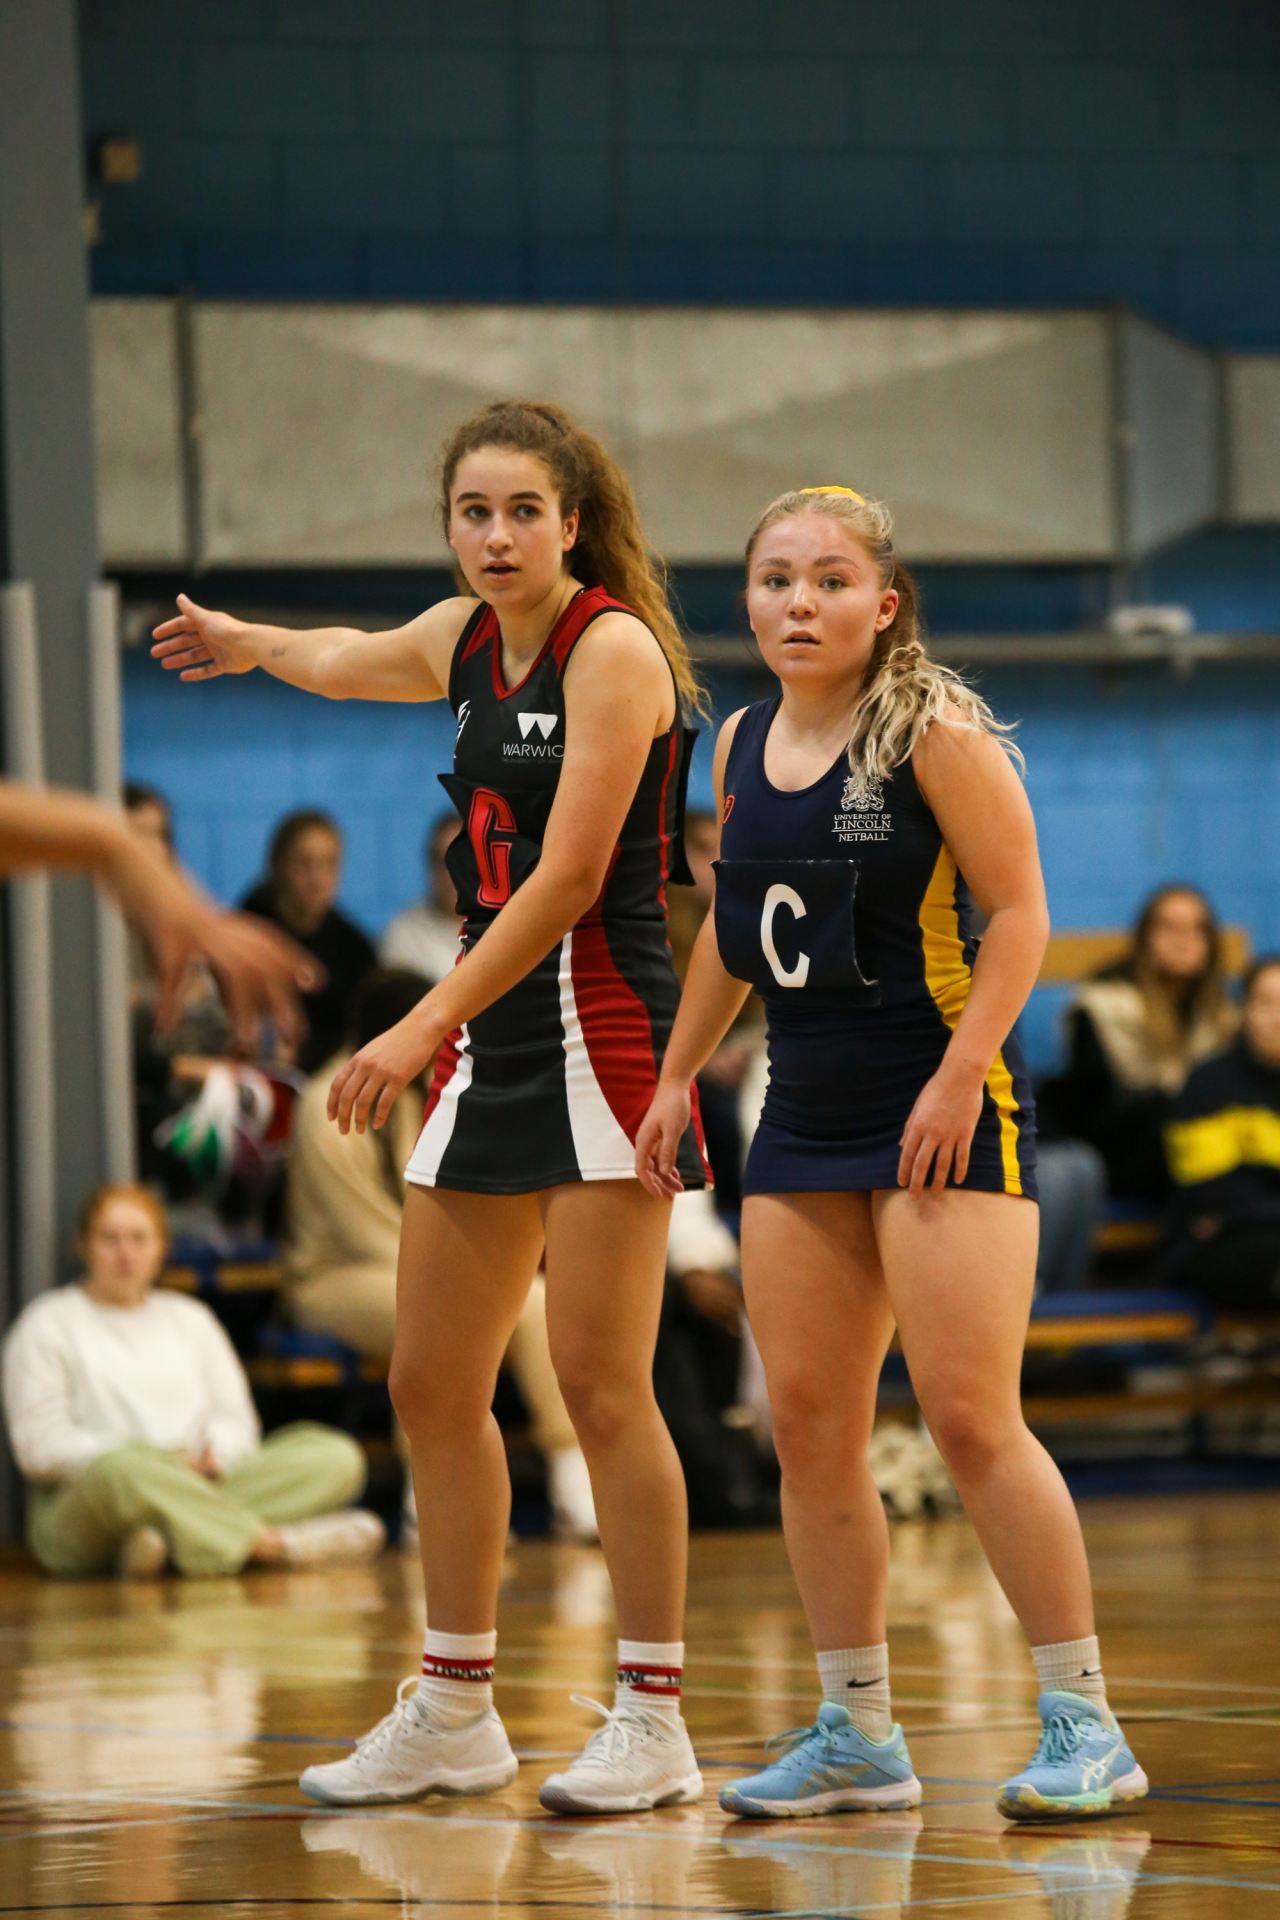 Two netball players during a netball match.